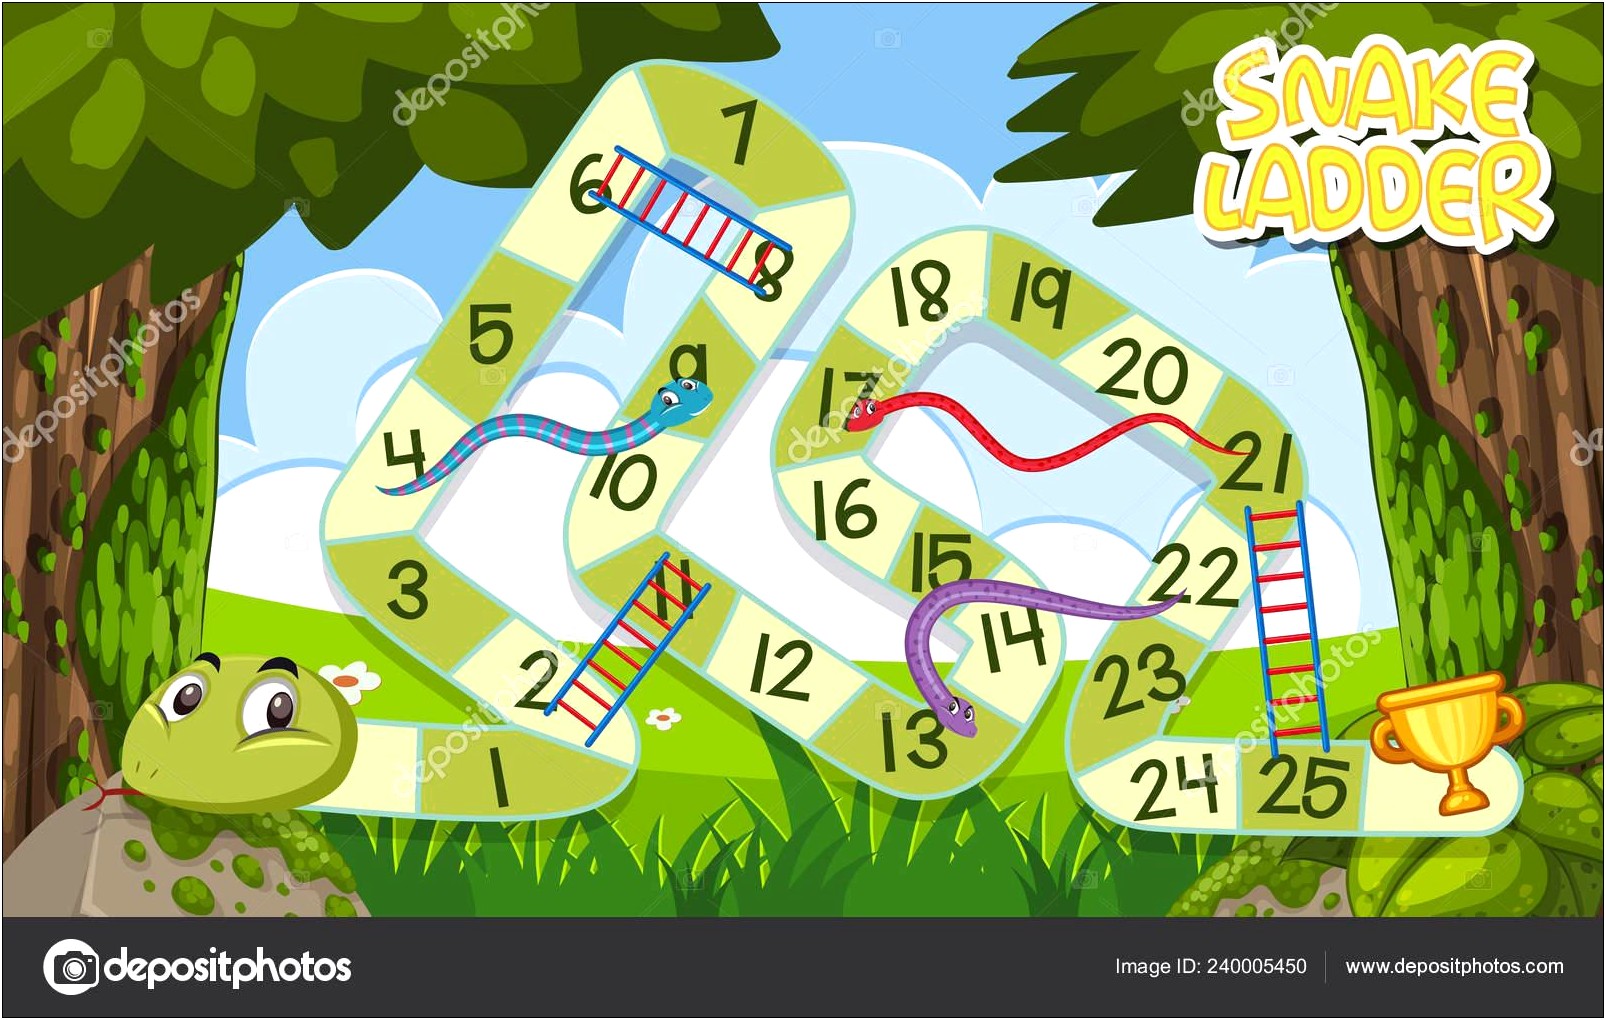 Snakes And Ladders Board Template Download